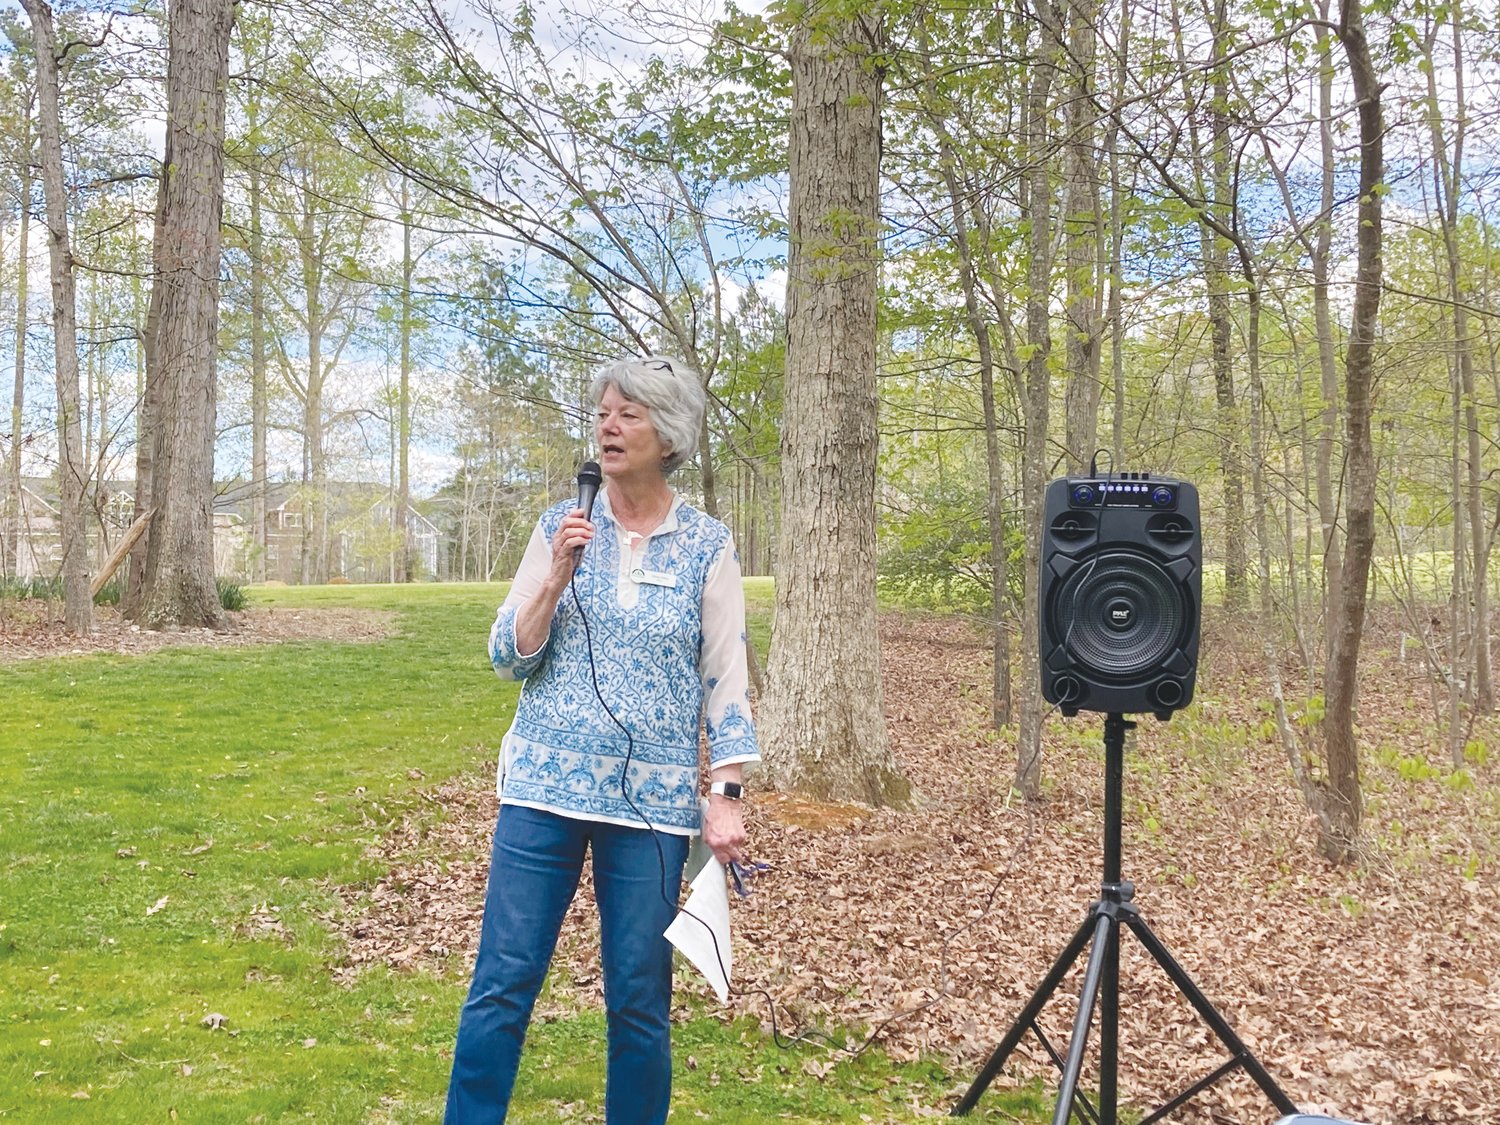 Pittsboro Mayor Cindy Perry gave a speech about the importance of trees during a tree-planting event on April 8.